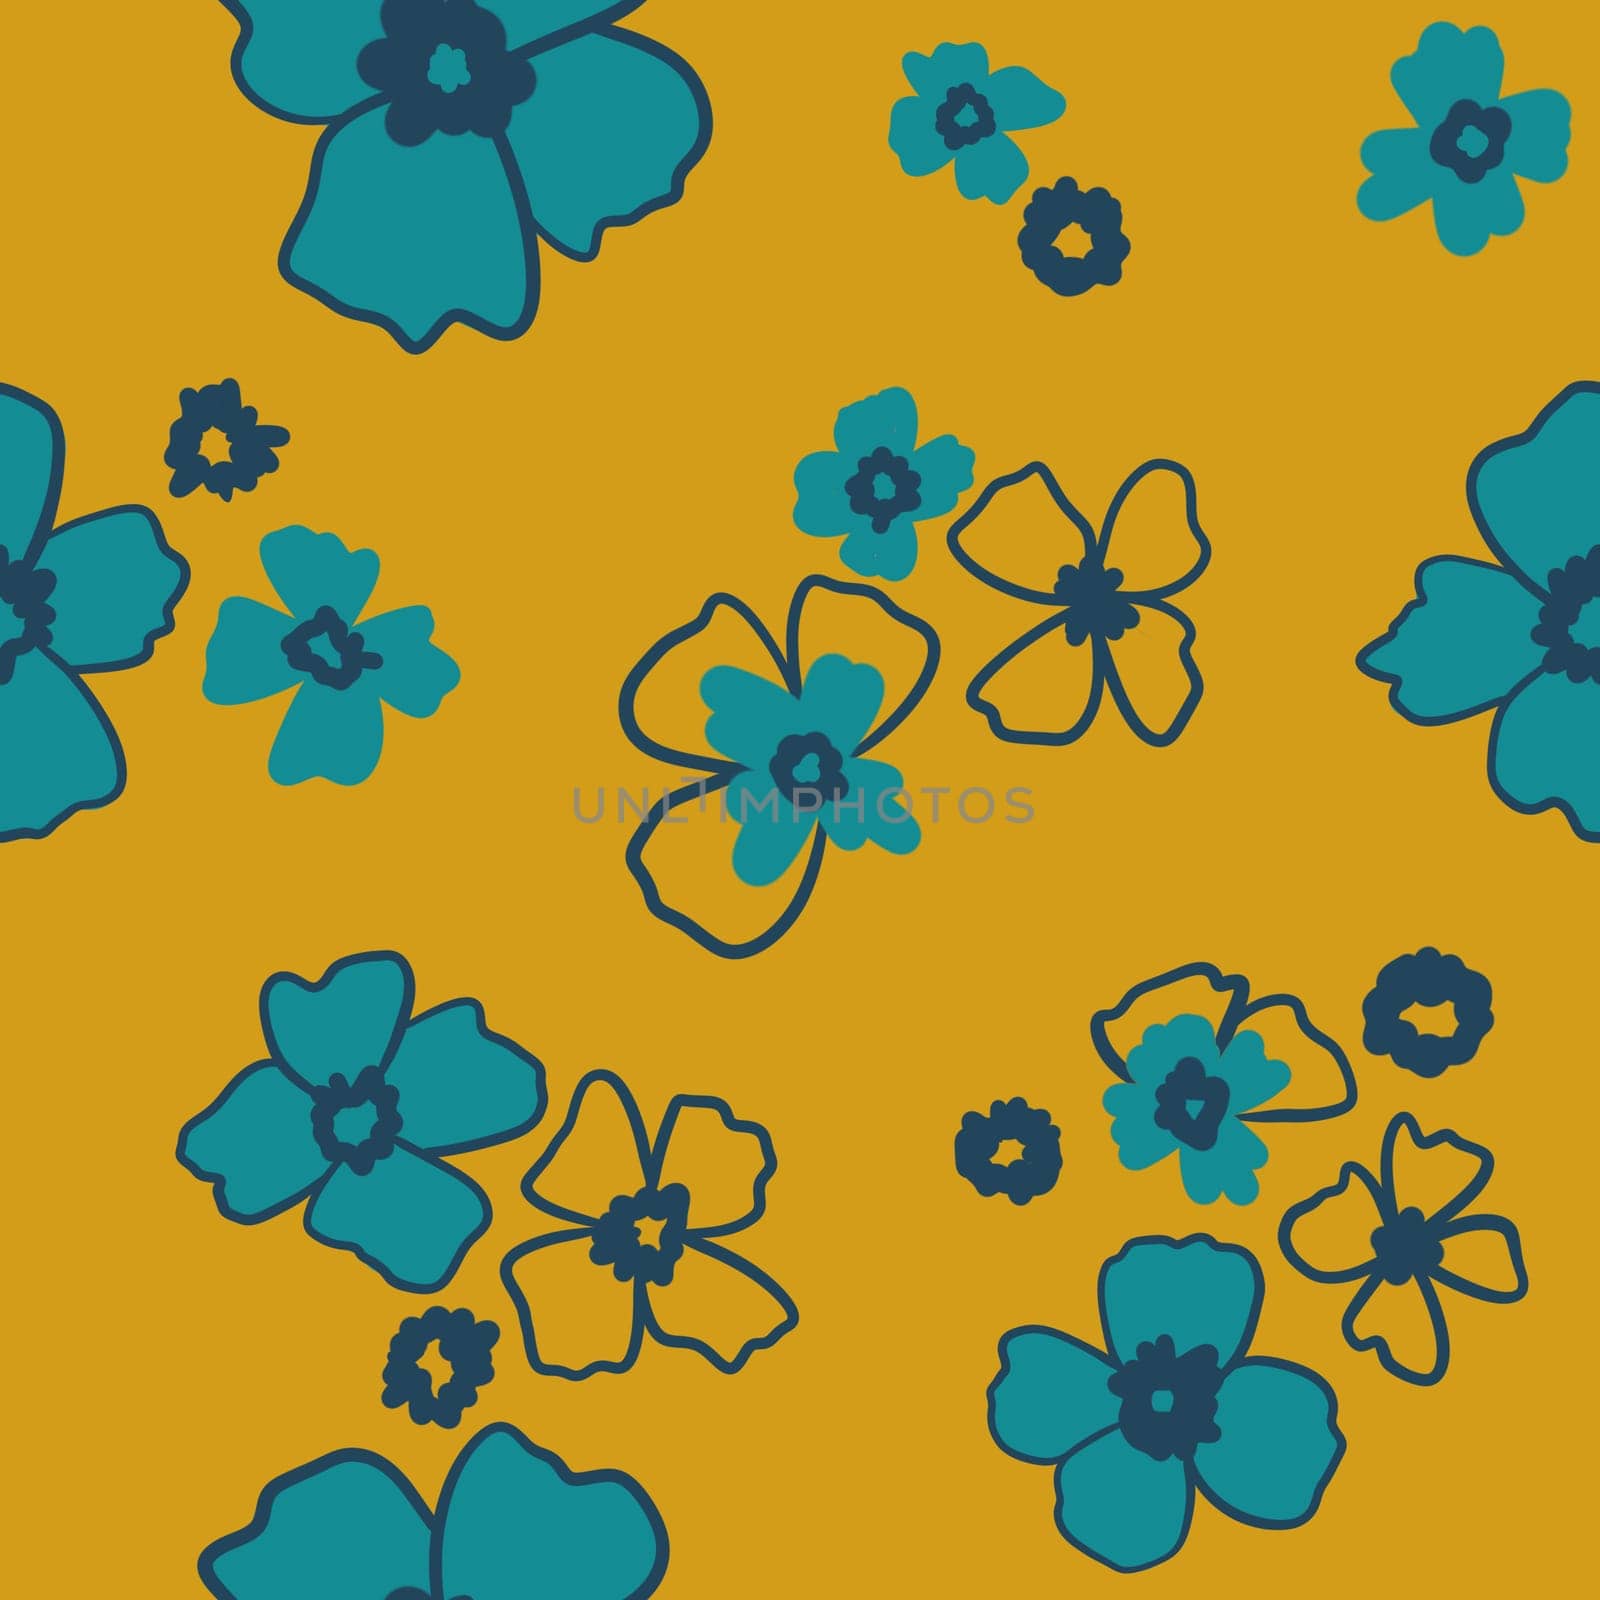 Hand drawn seamless pattern with yellow blue daisy flowers on retro background. Retro vintage mid century modern floral print with red blobs, hippie bloom blossom nature design, warm color. by Lagmar